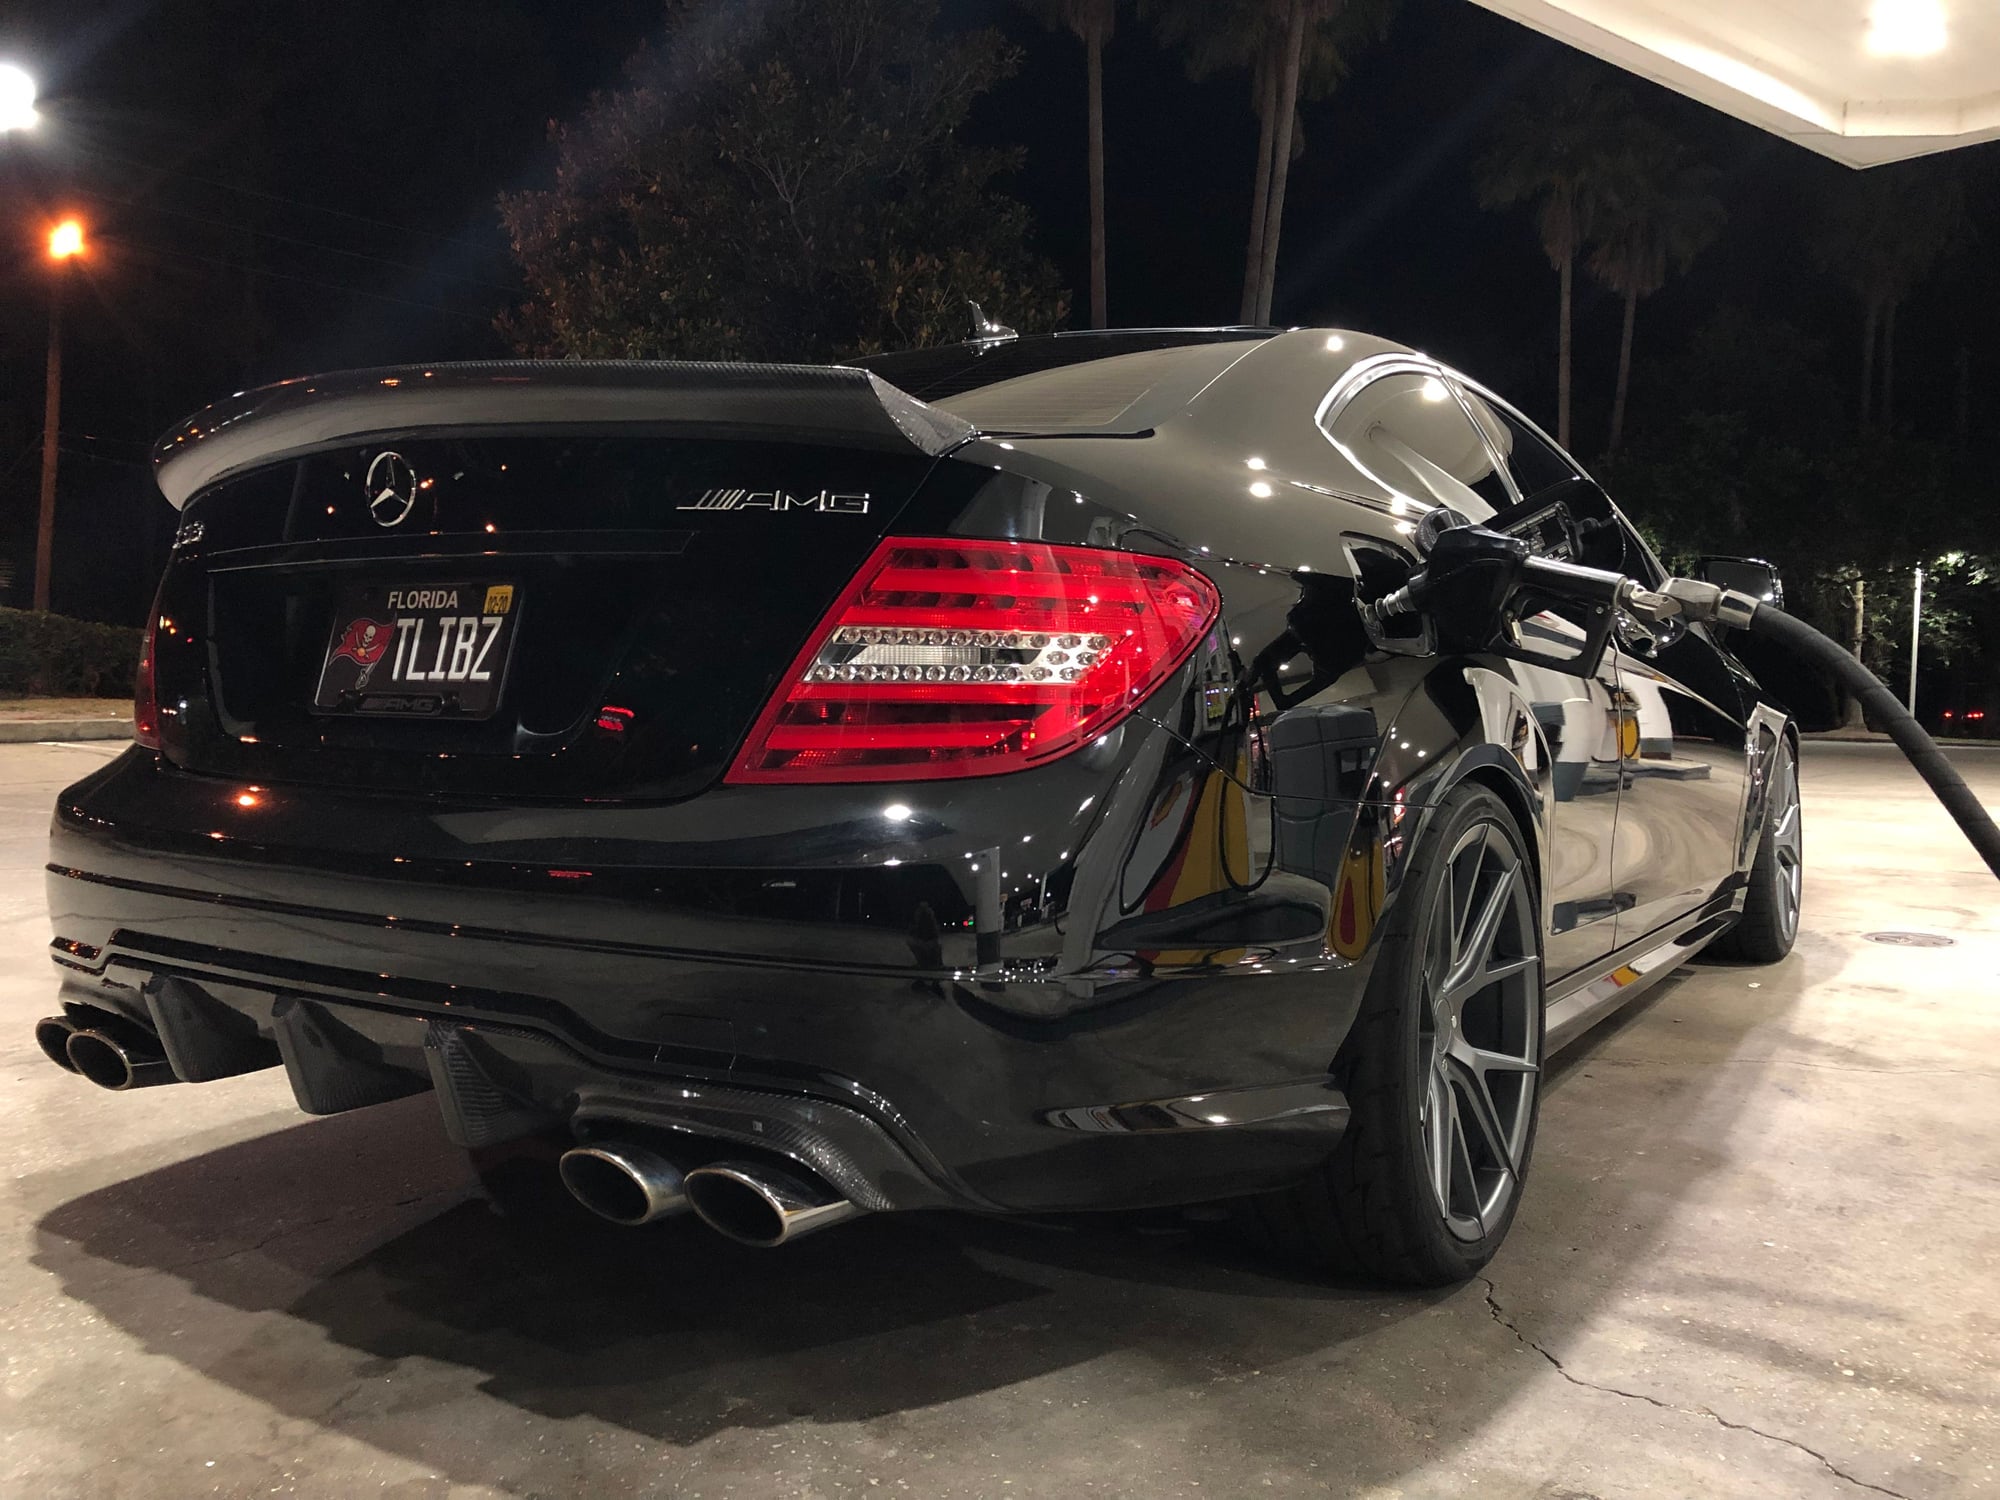 2012 Mercedes-Benz C63 AMG - 2012 C63 AMG Coupe - tastefully modified - Used - VIN WDDGJ7HB5CF797699 - 64,000 Miles - 8 cyl - 2WD - Automatic - Coupe - Black - Altamonte Springs, FL 32701, United States